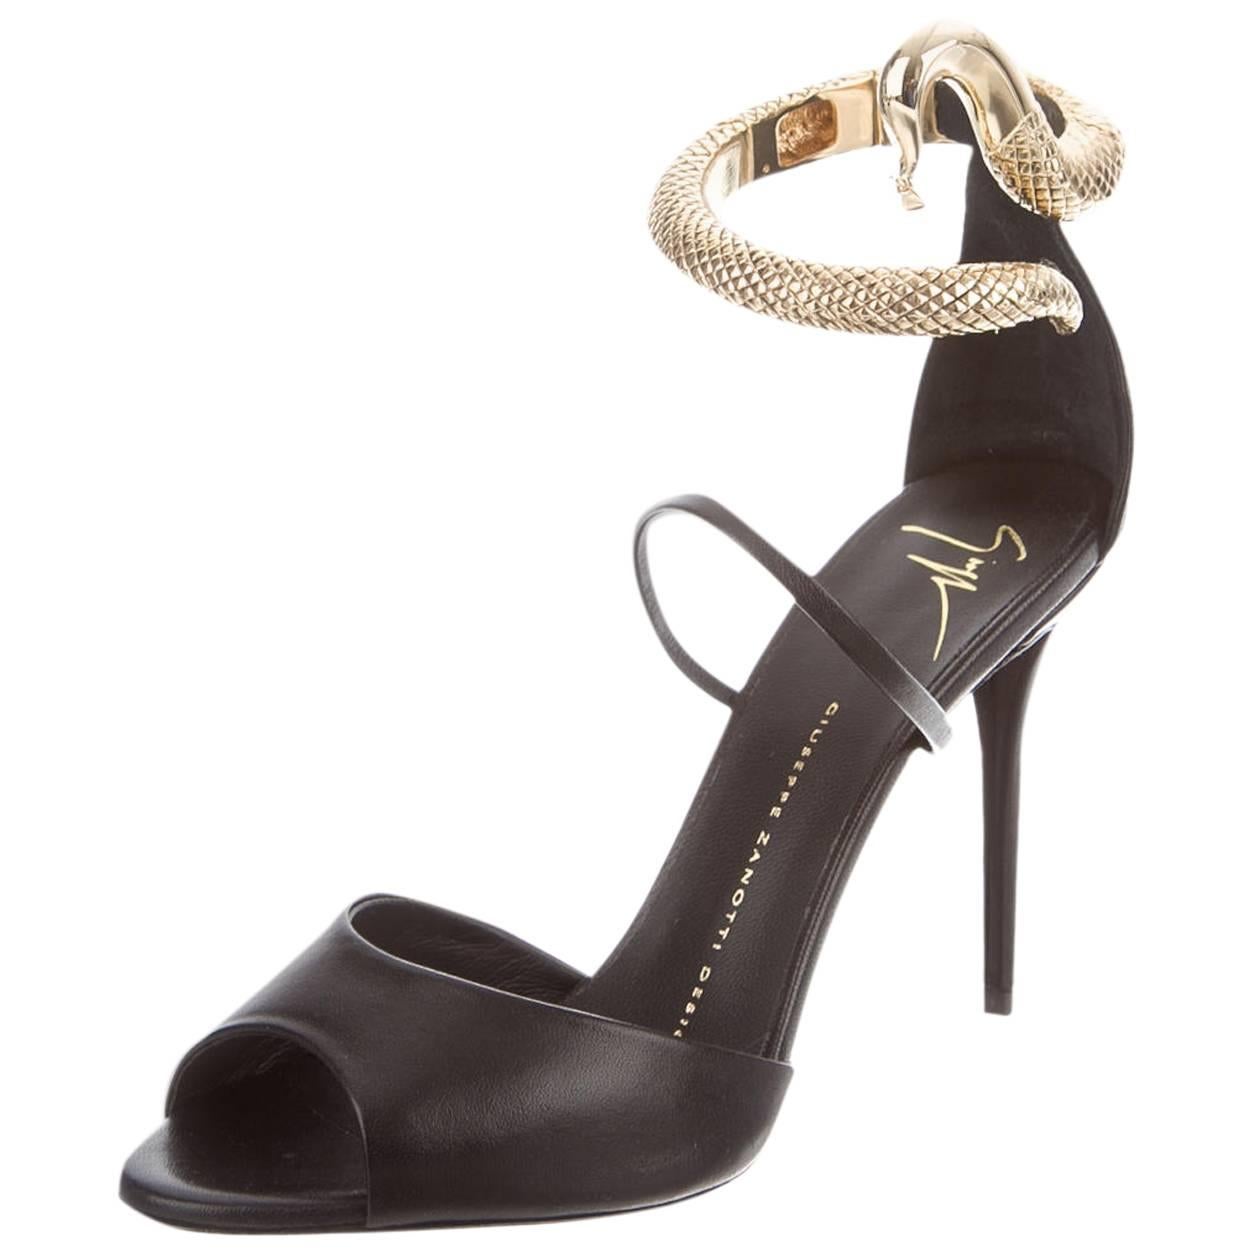 Giuseppe Zanotti NEW & SOLD OUT Black Gold Snake Heels Strappy Sandals in Box